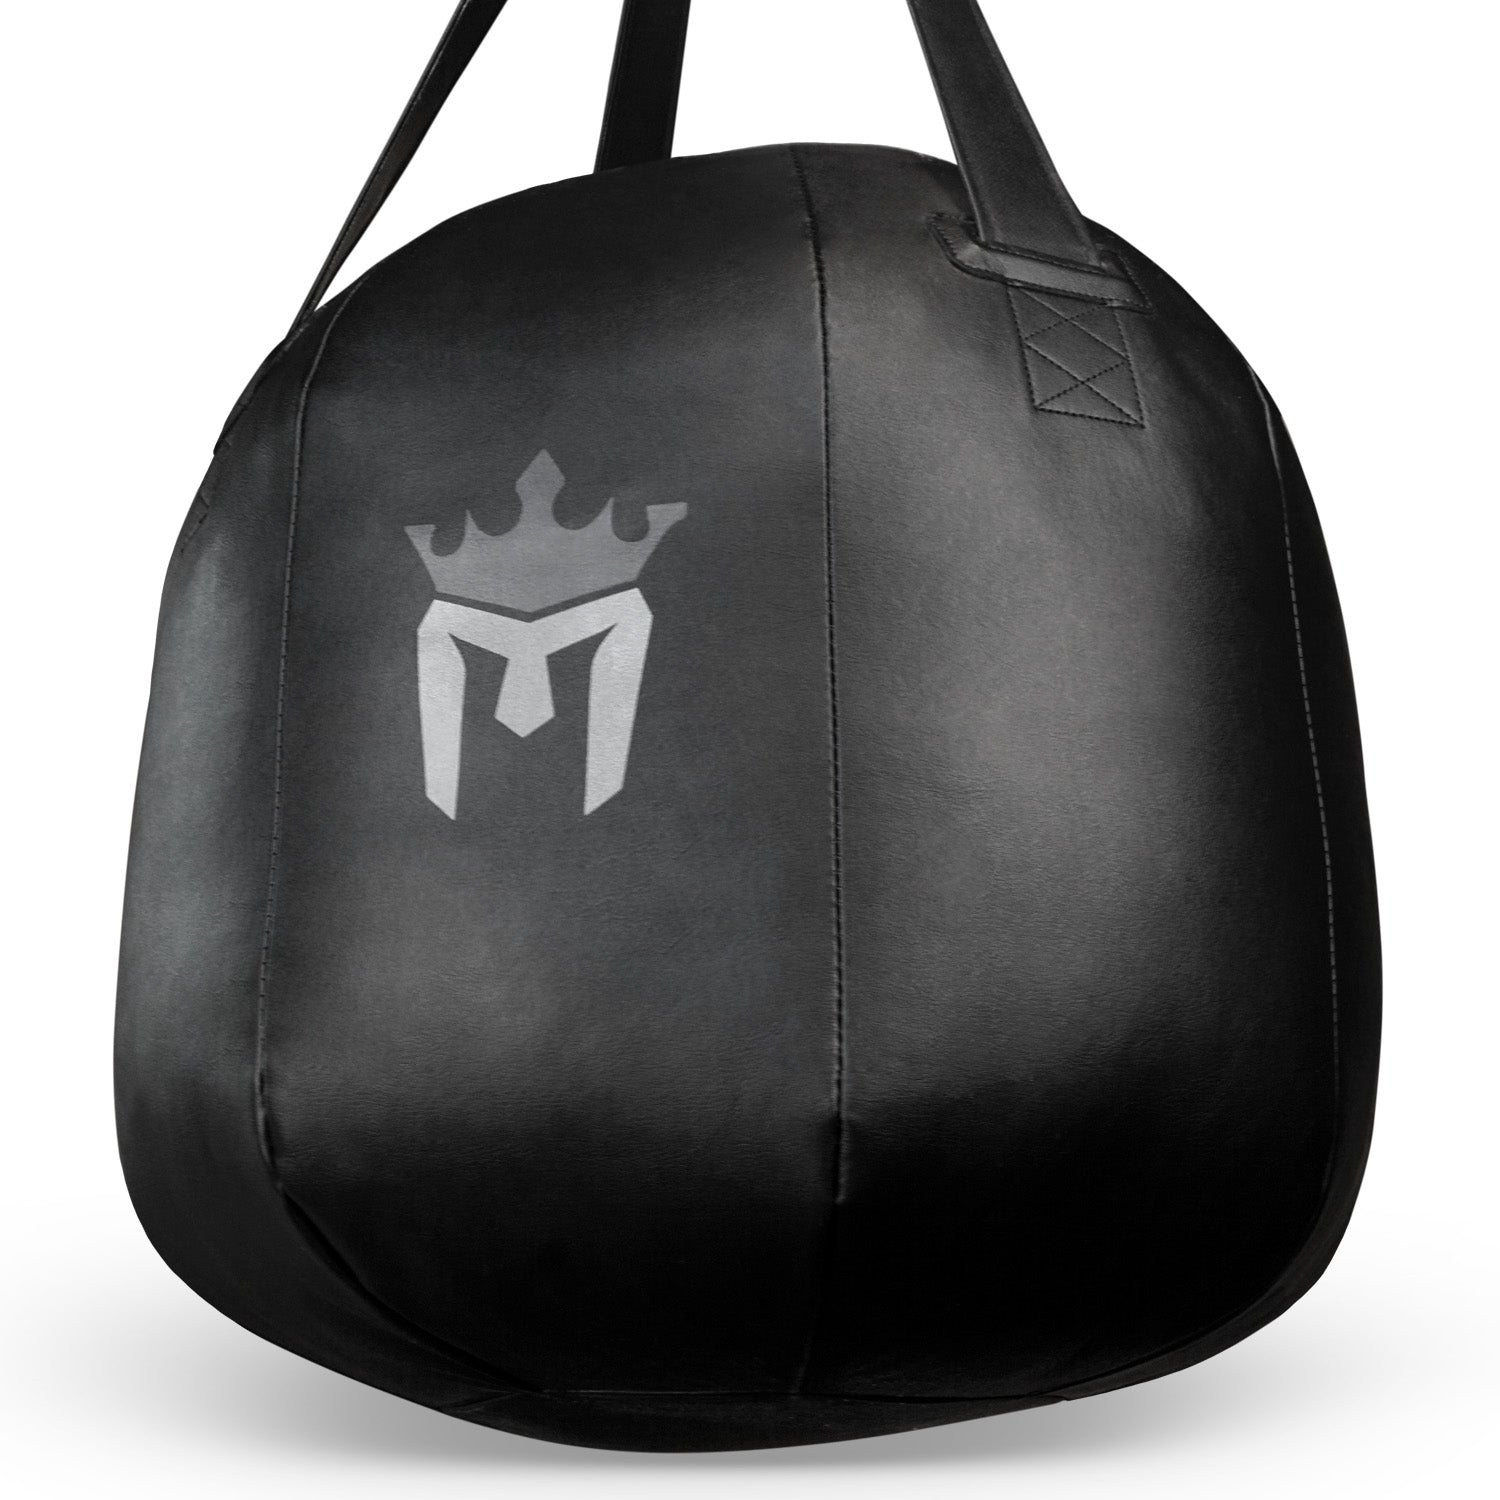 Meister 60lb Filled Wrecking Ball Heavy Bag for Boxing & MMA